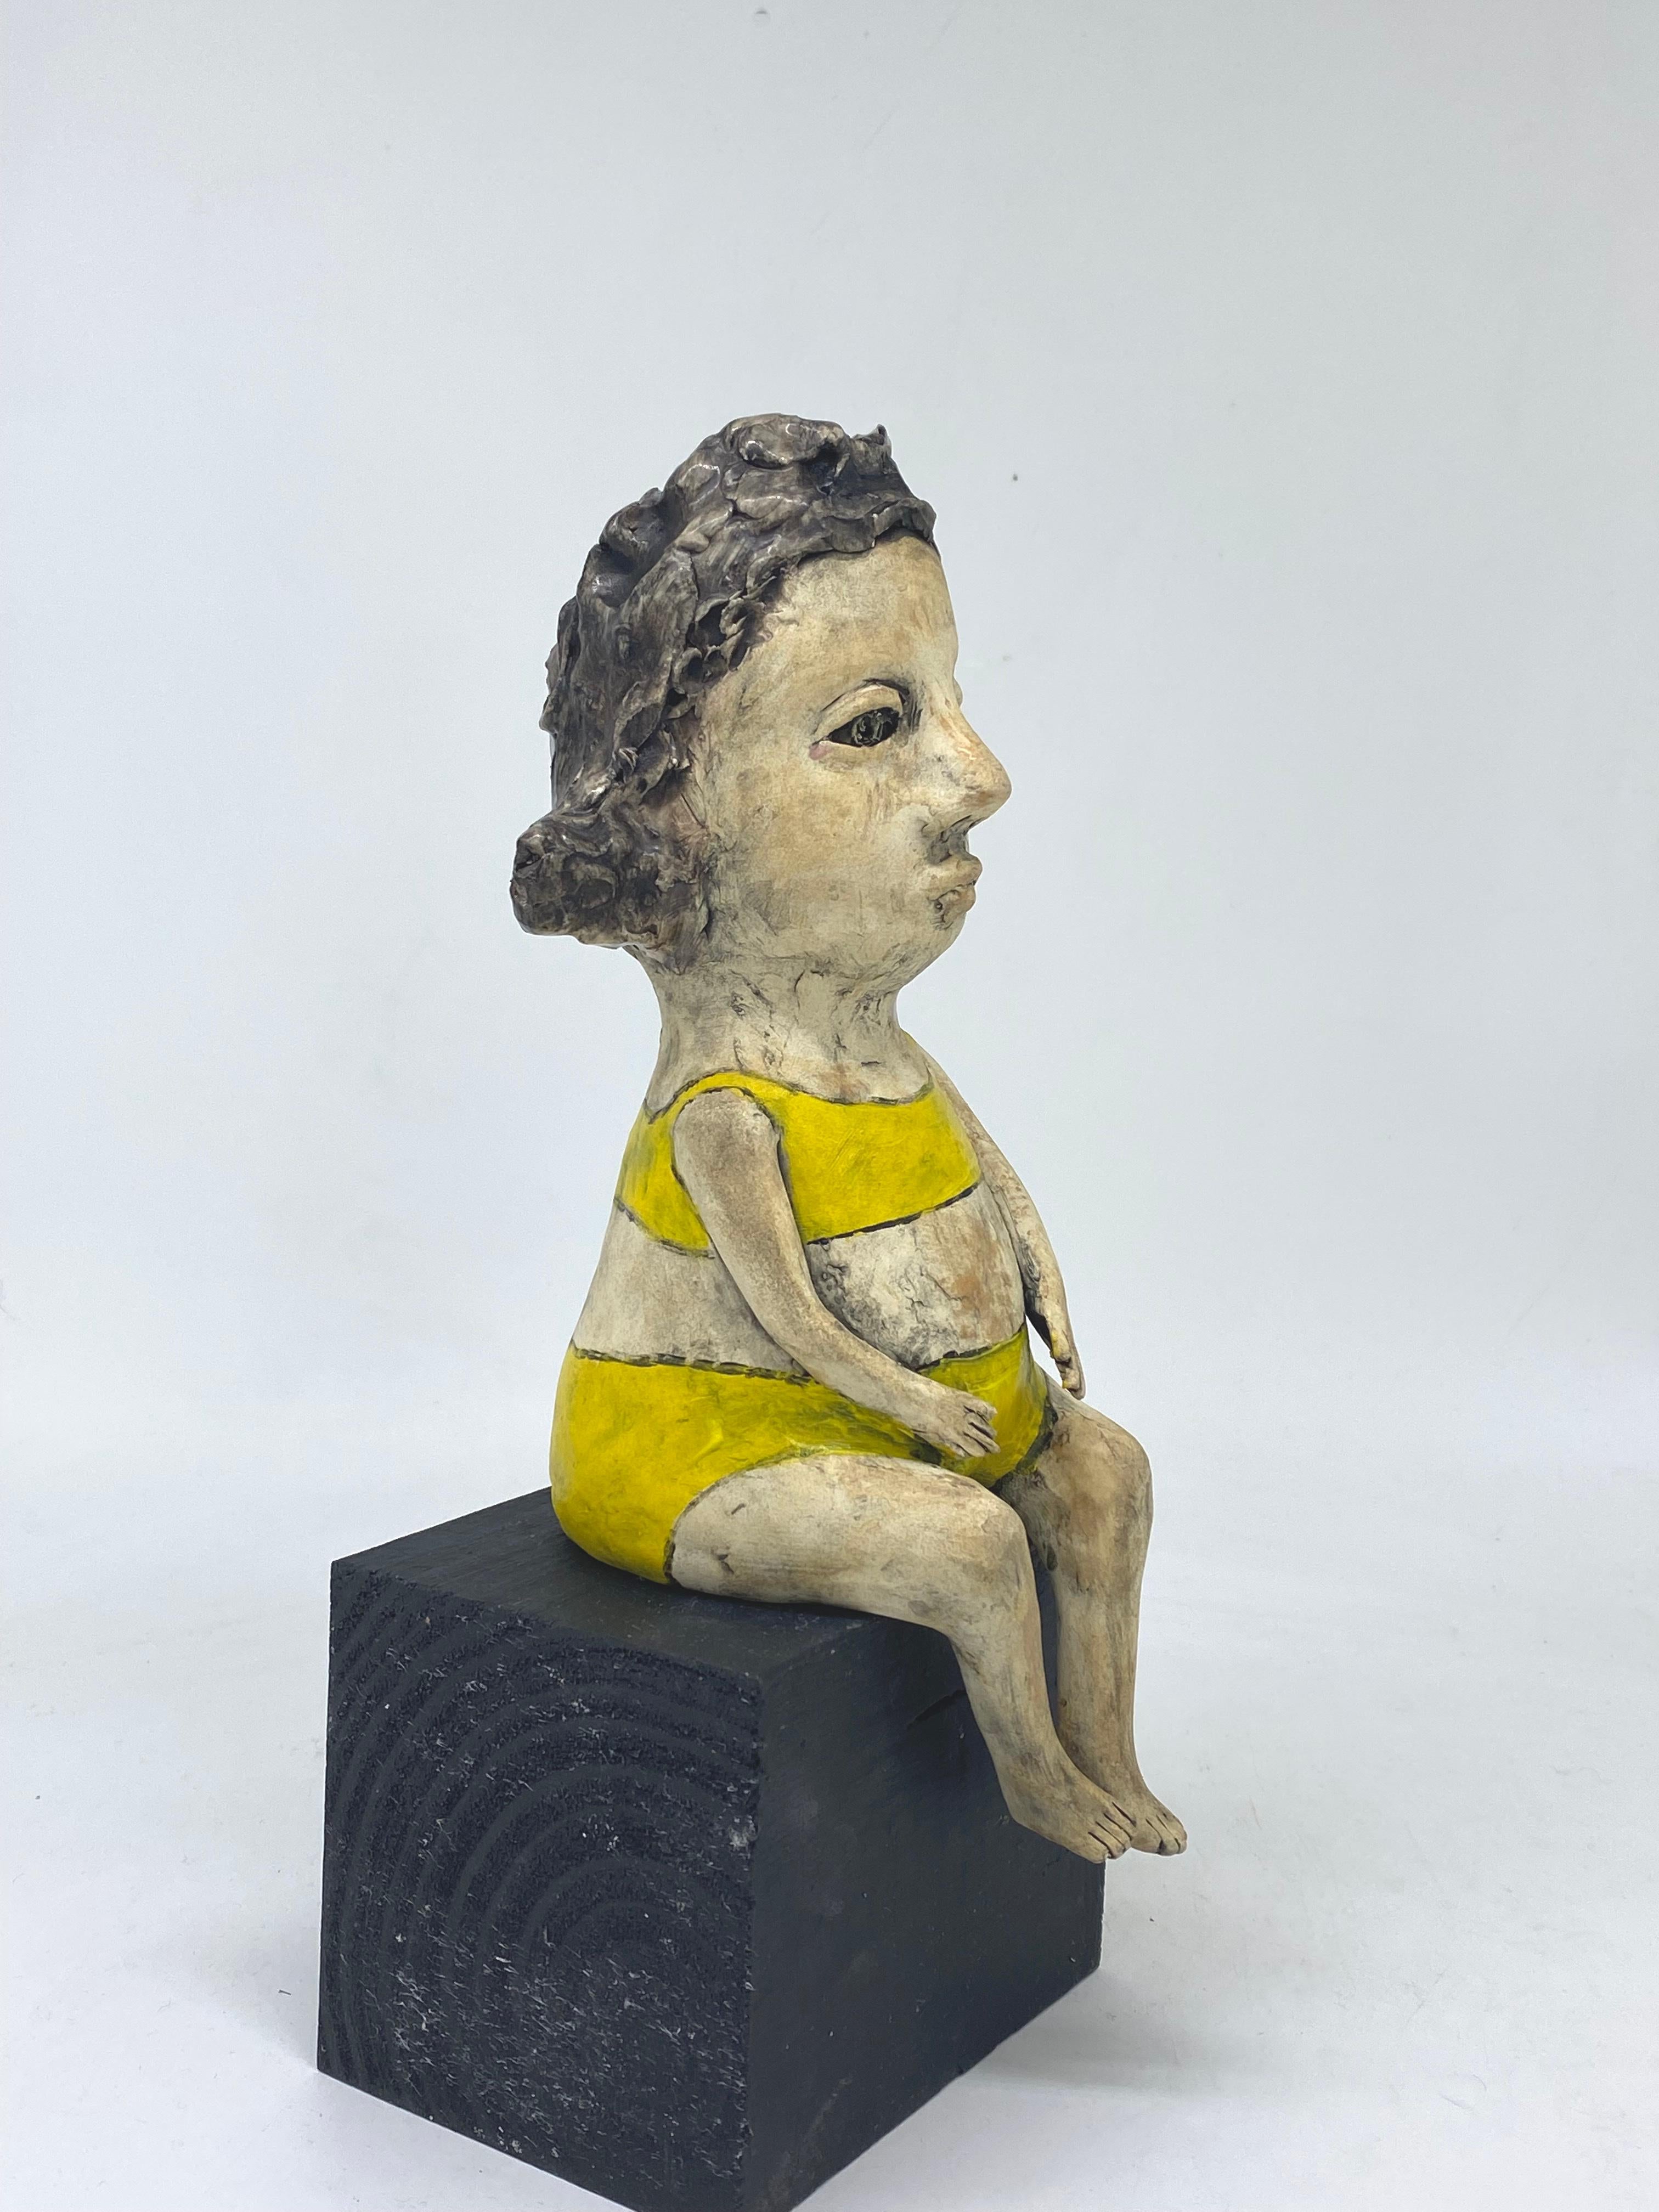 Ceramic figure seated on wood block: 'Cheer up' - Sculpture by Ashley Benton